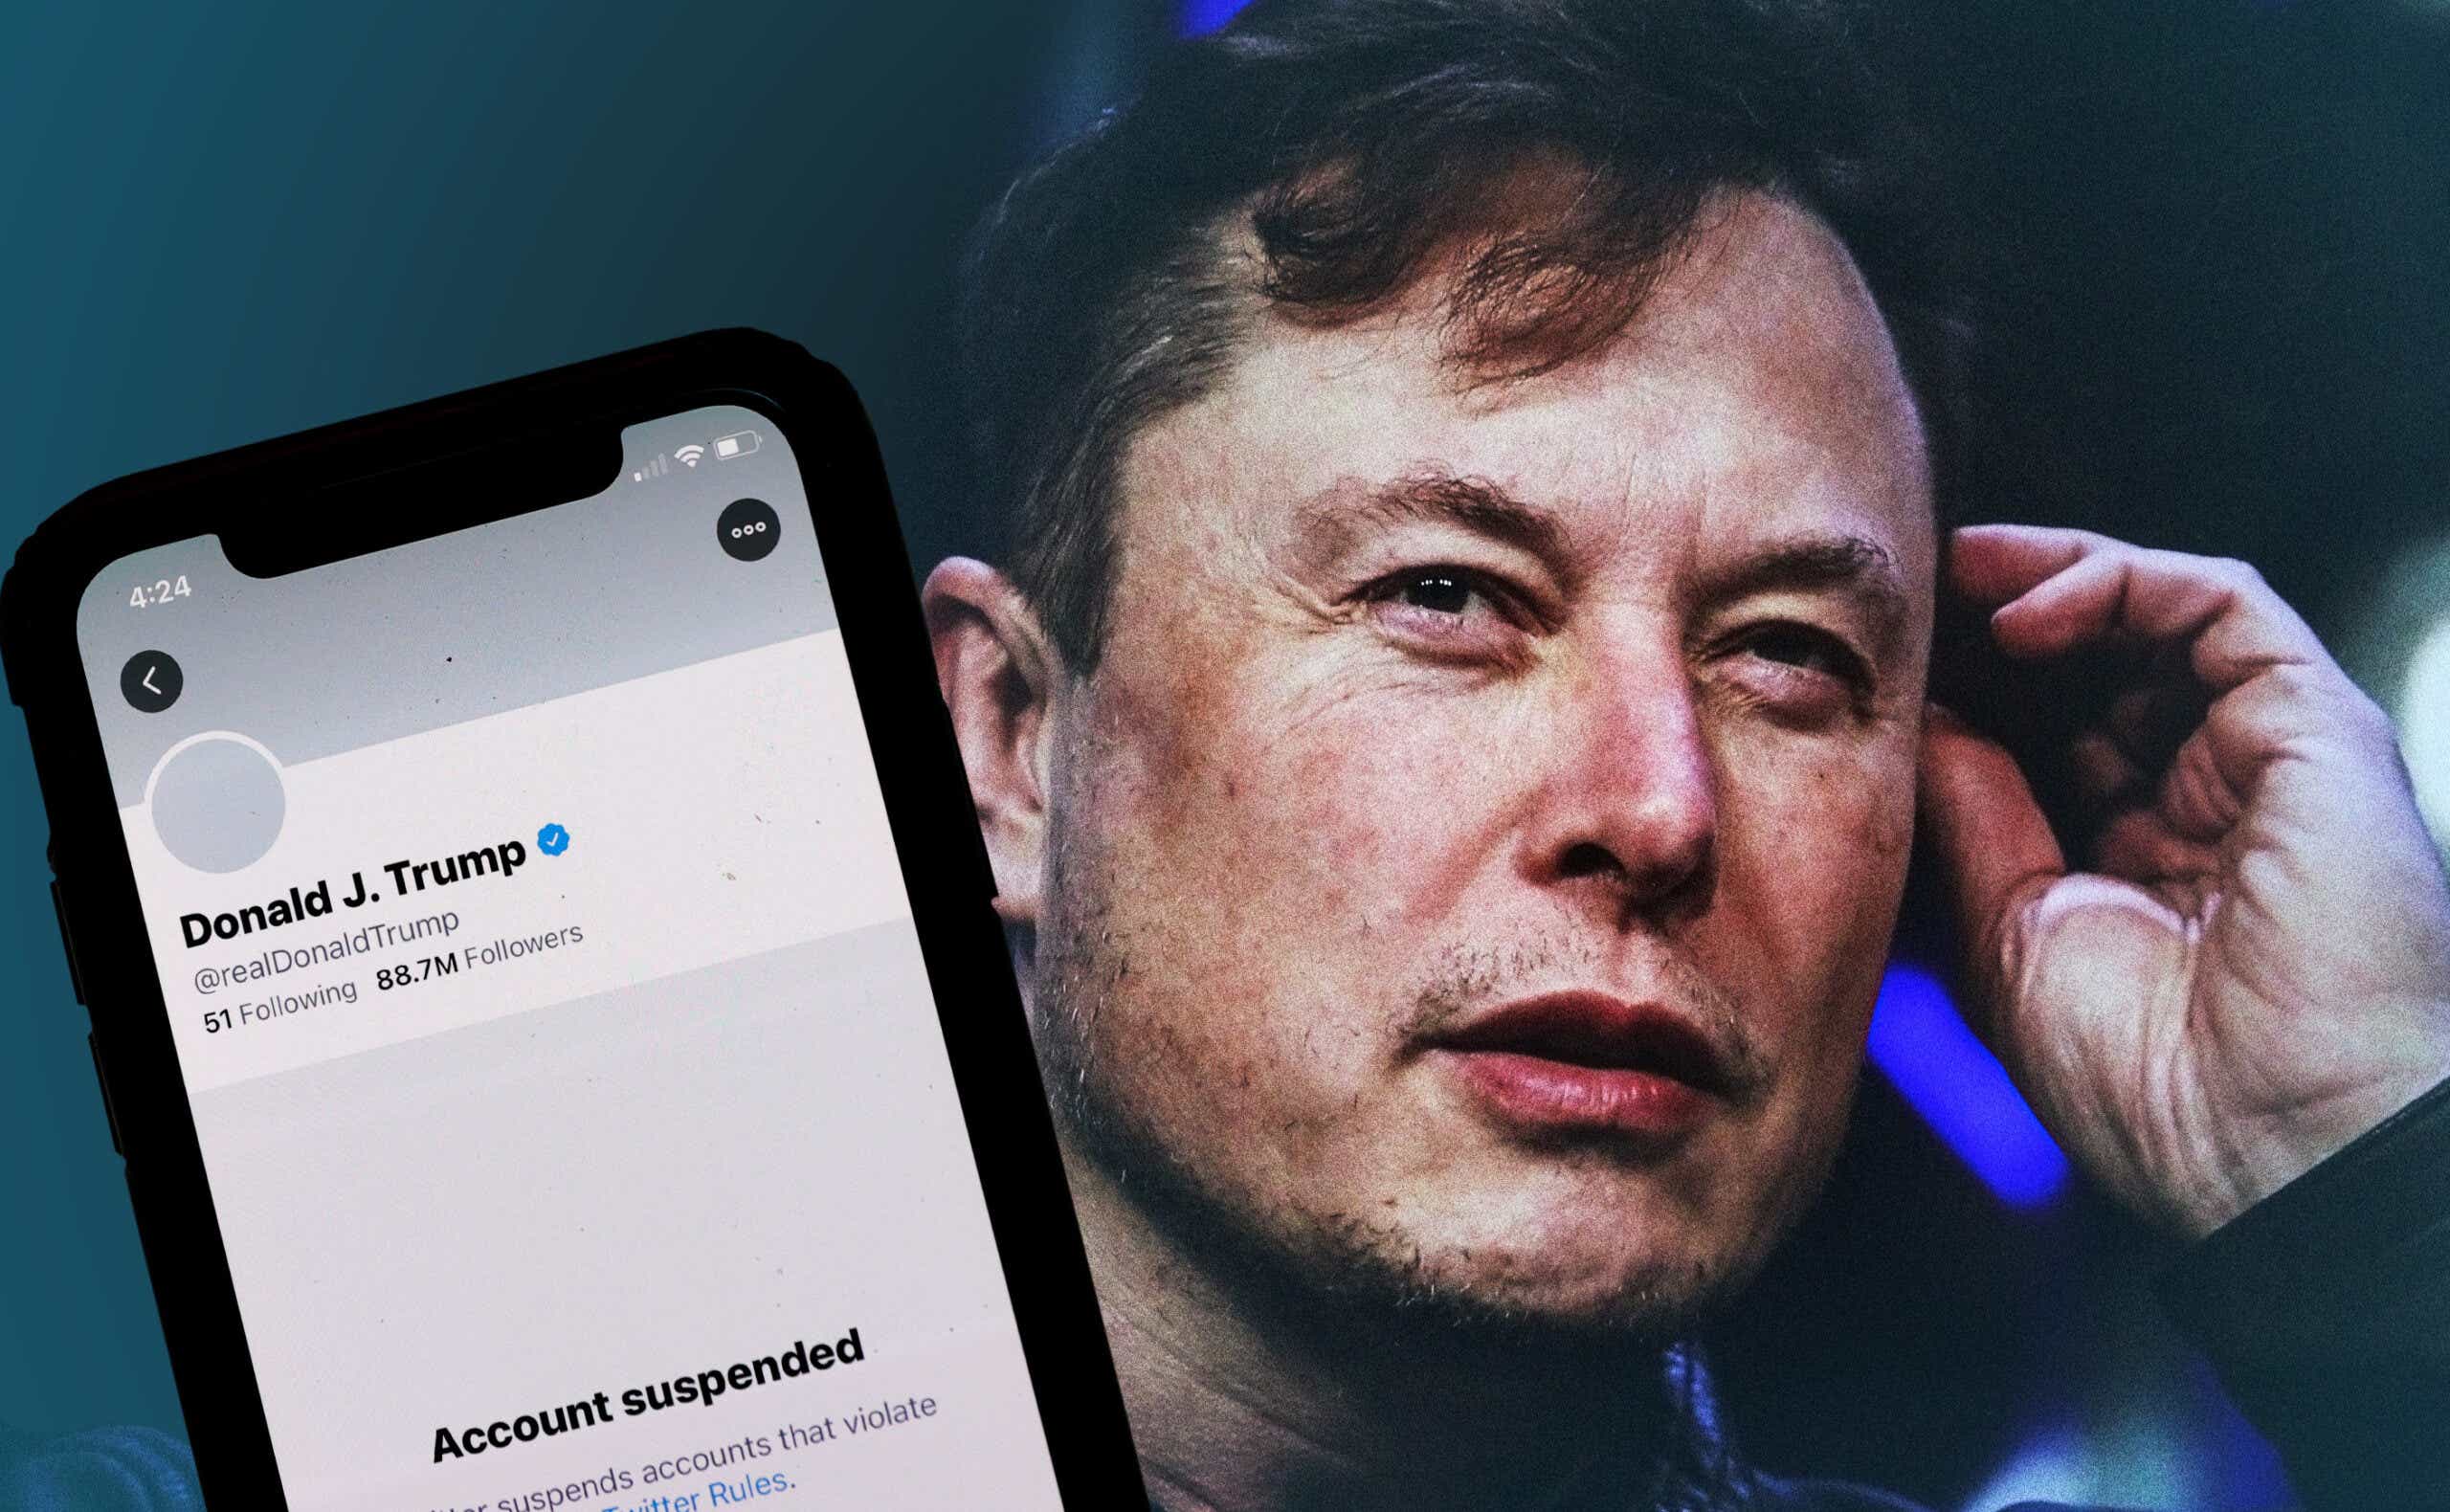 Elon Musk with an image of Donald Trump's suspended Twitter account